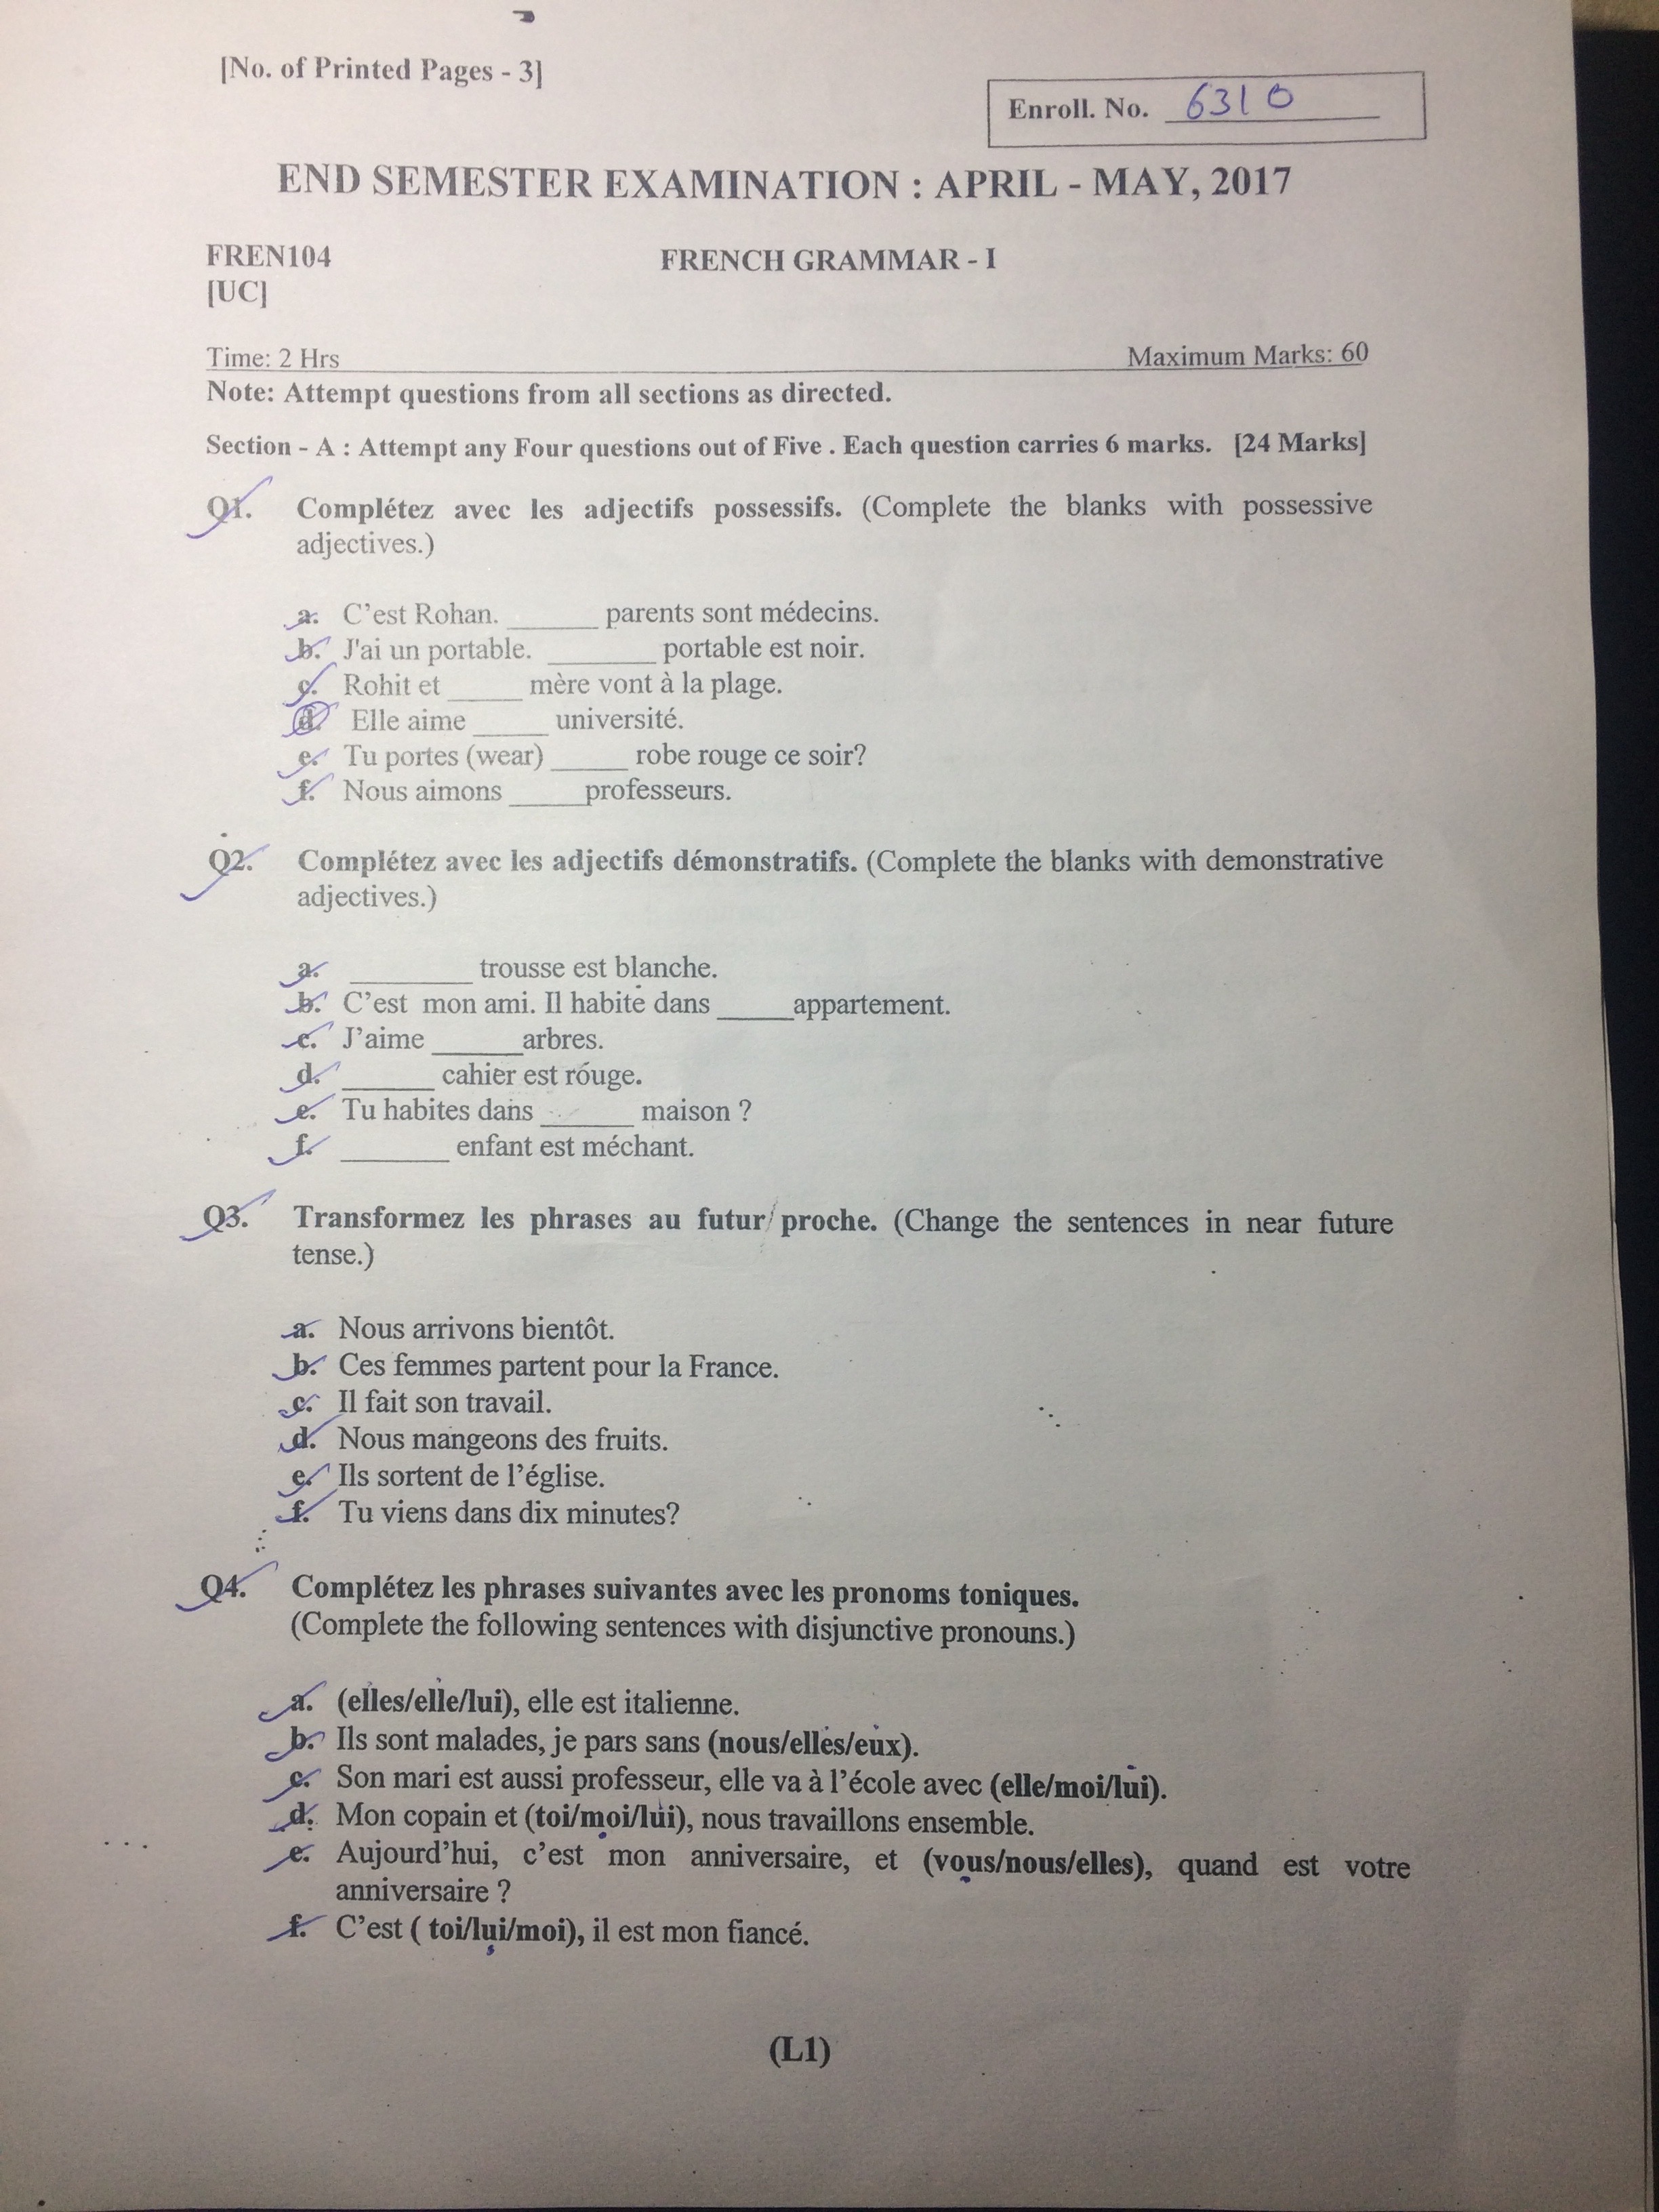 Amity computer science sem 2 question paper-IMG_8767 (1).JPG